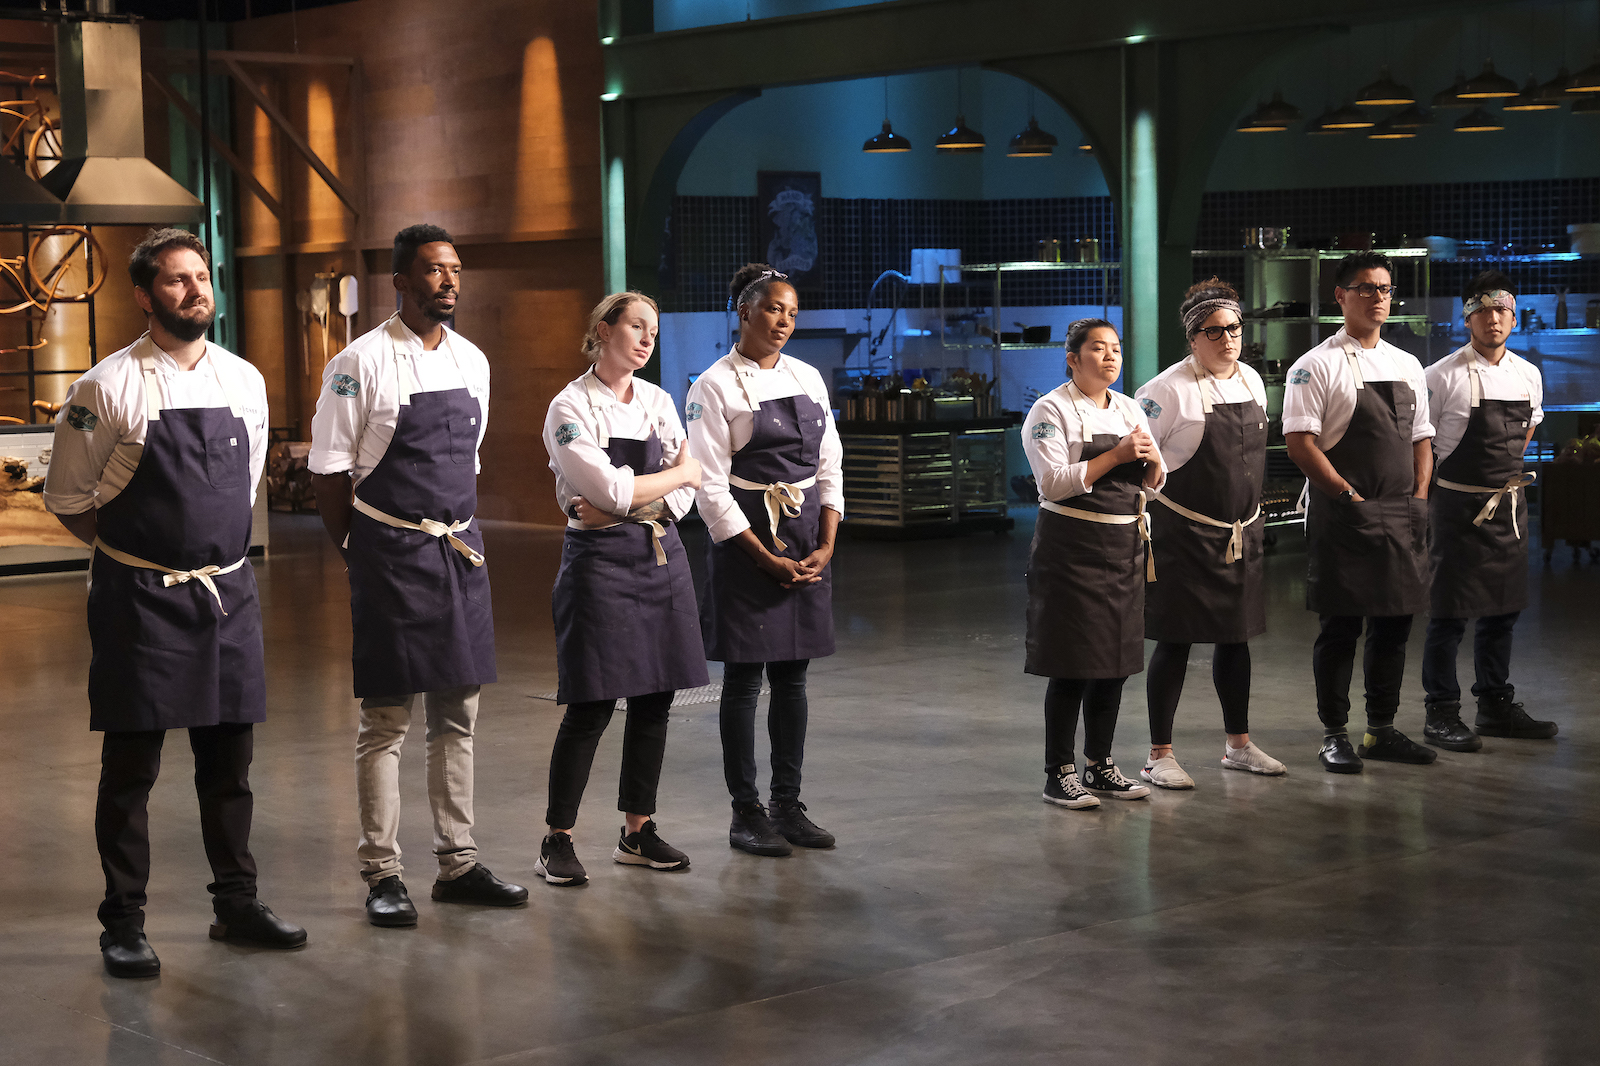 ‘Top Chef’ Tom Colicchio on Gabe Erales Fallout: The Show Vets ‘People Very, Very Closely’